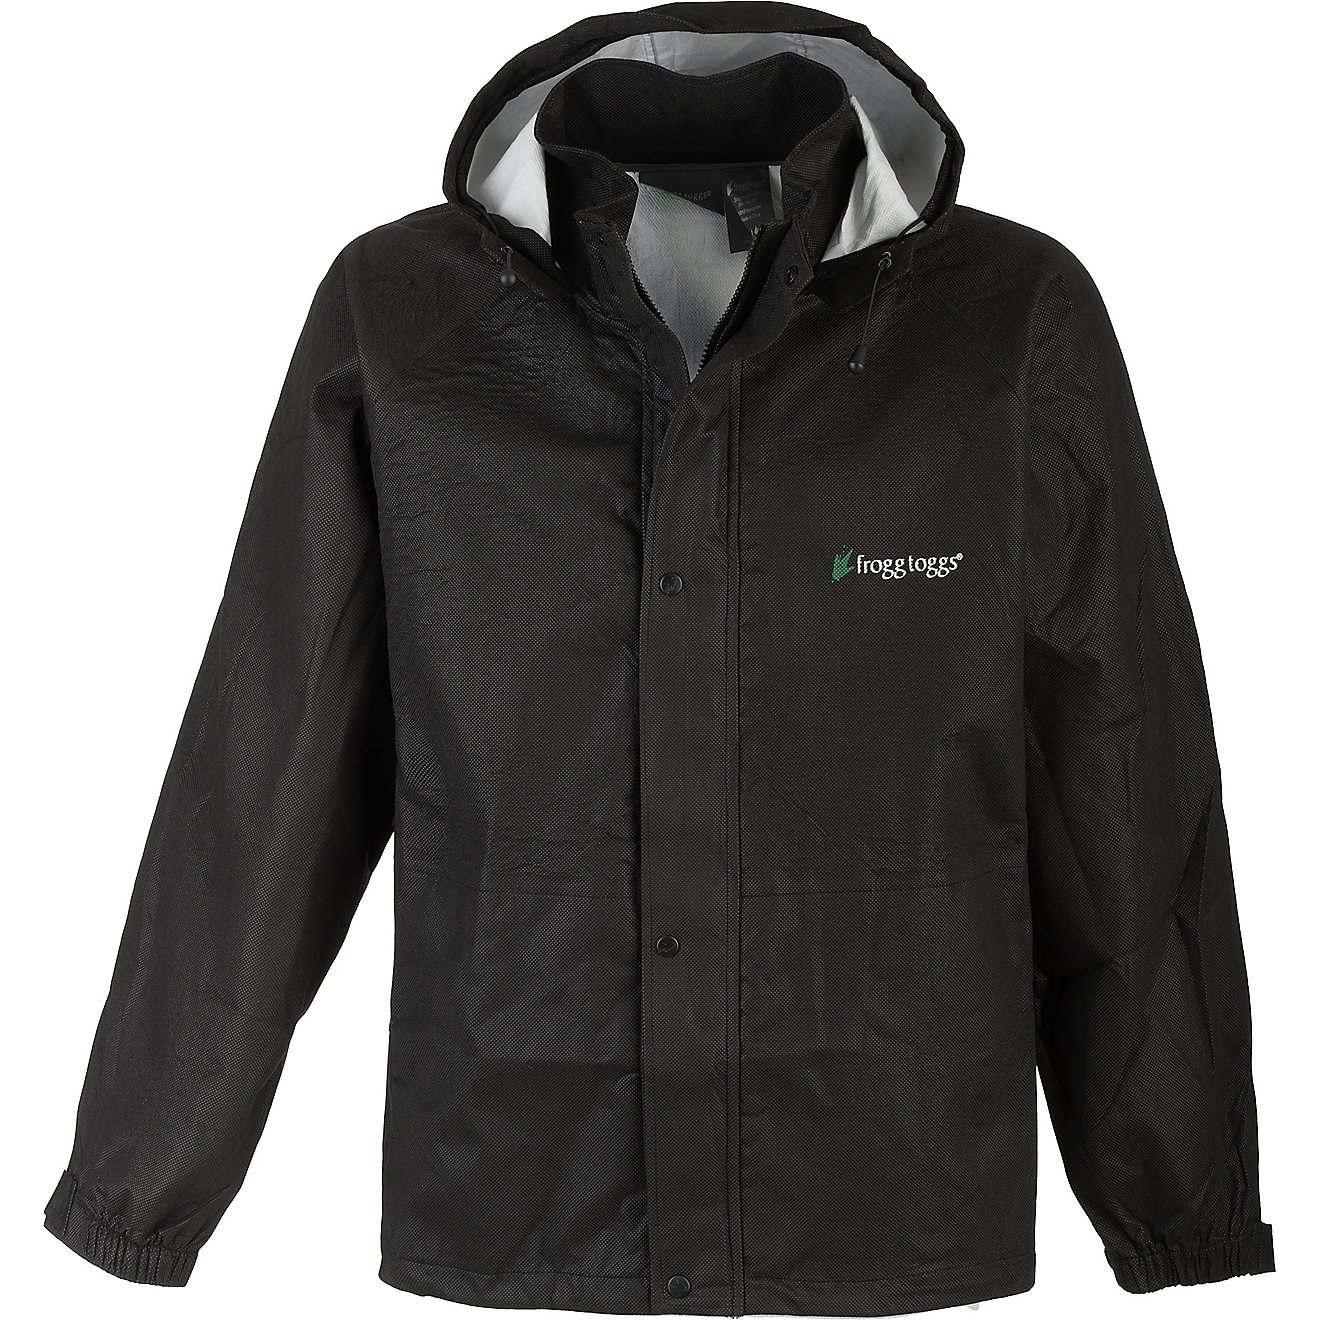 Frogg toggs Men's Bull Frogg Rain Jacket                                                                                         - view number 1